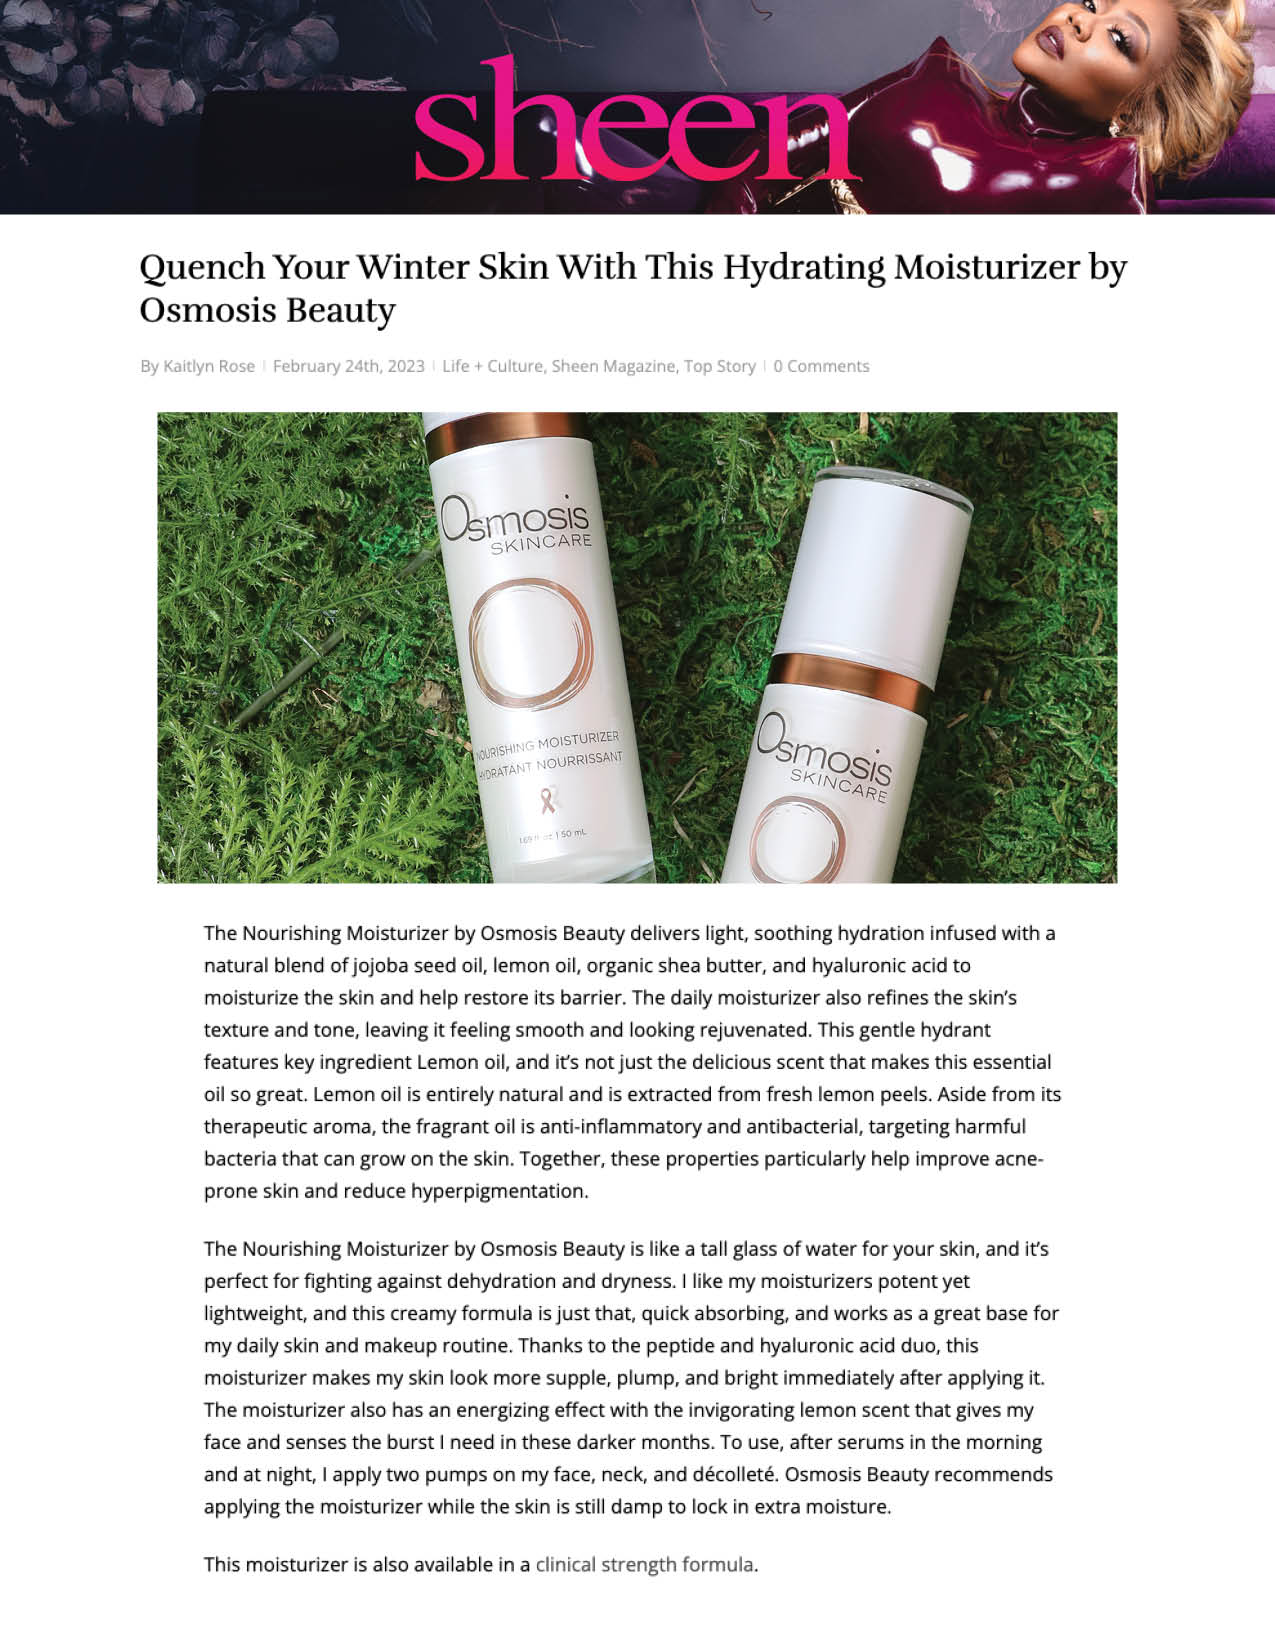 The Nourishing Moisturizer was featured on Sheen.com in a piece on how to Quench Your Winter Skin With This Hydrating Moisturizer by Osmosis Beauty.